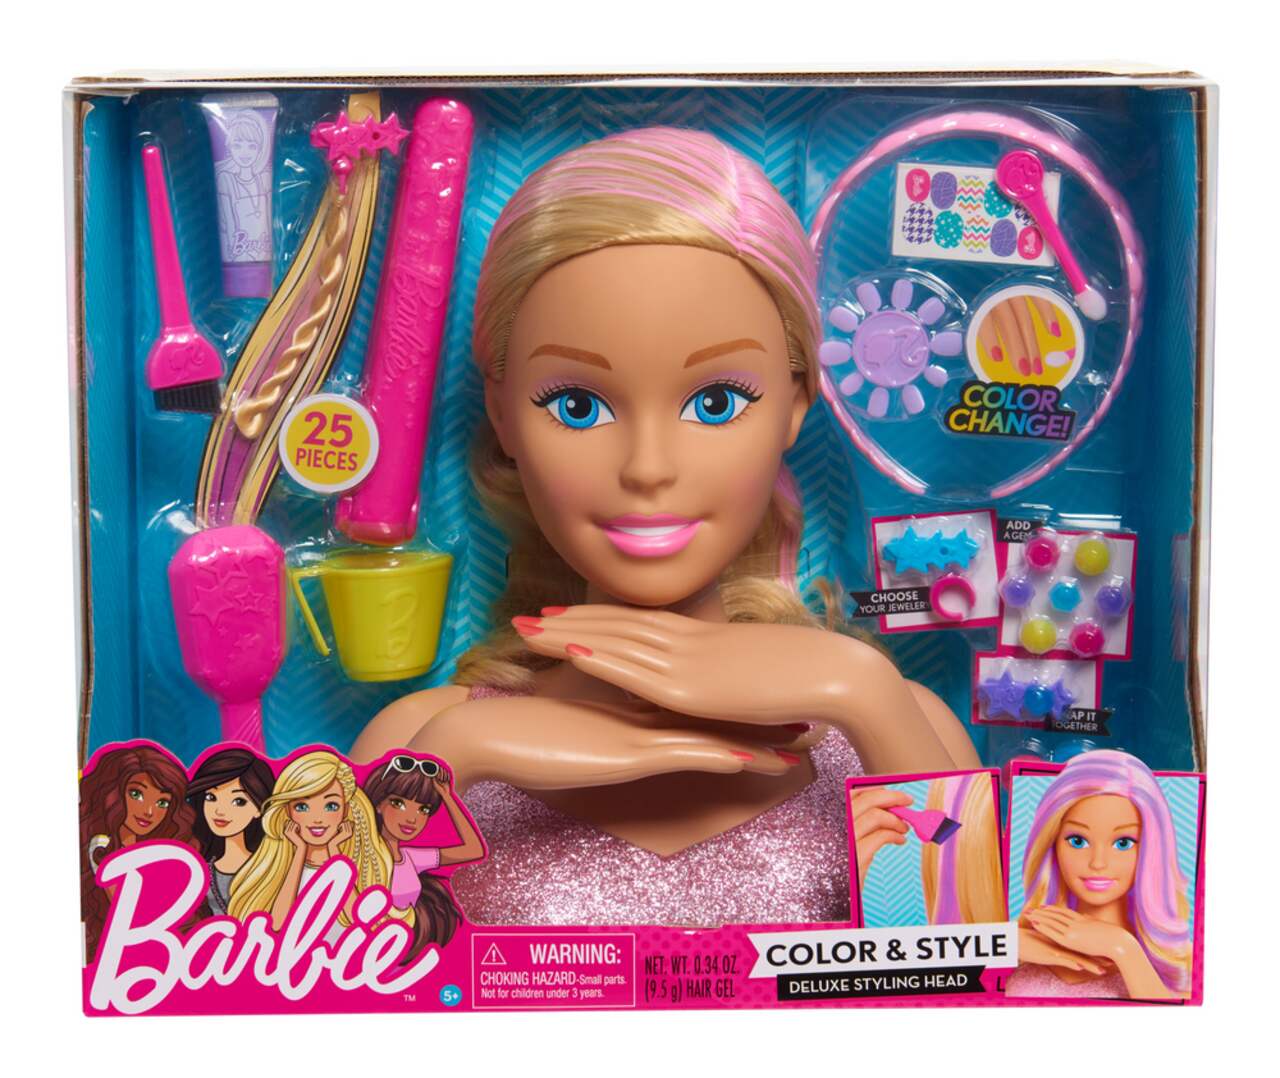 Mattel Barbie® Color & Style Deluxe Styling Head Toy w/Accessories, Blonde,  Ages 3+